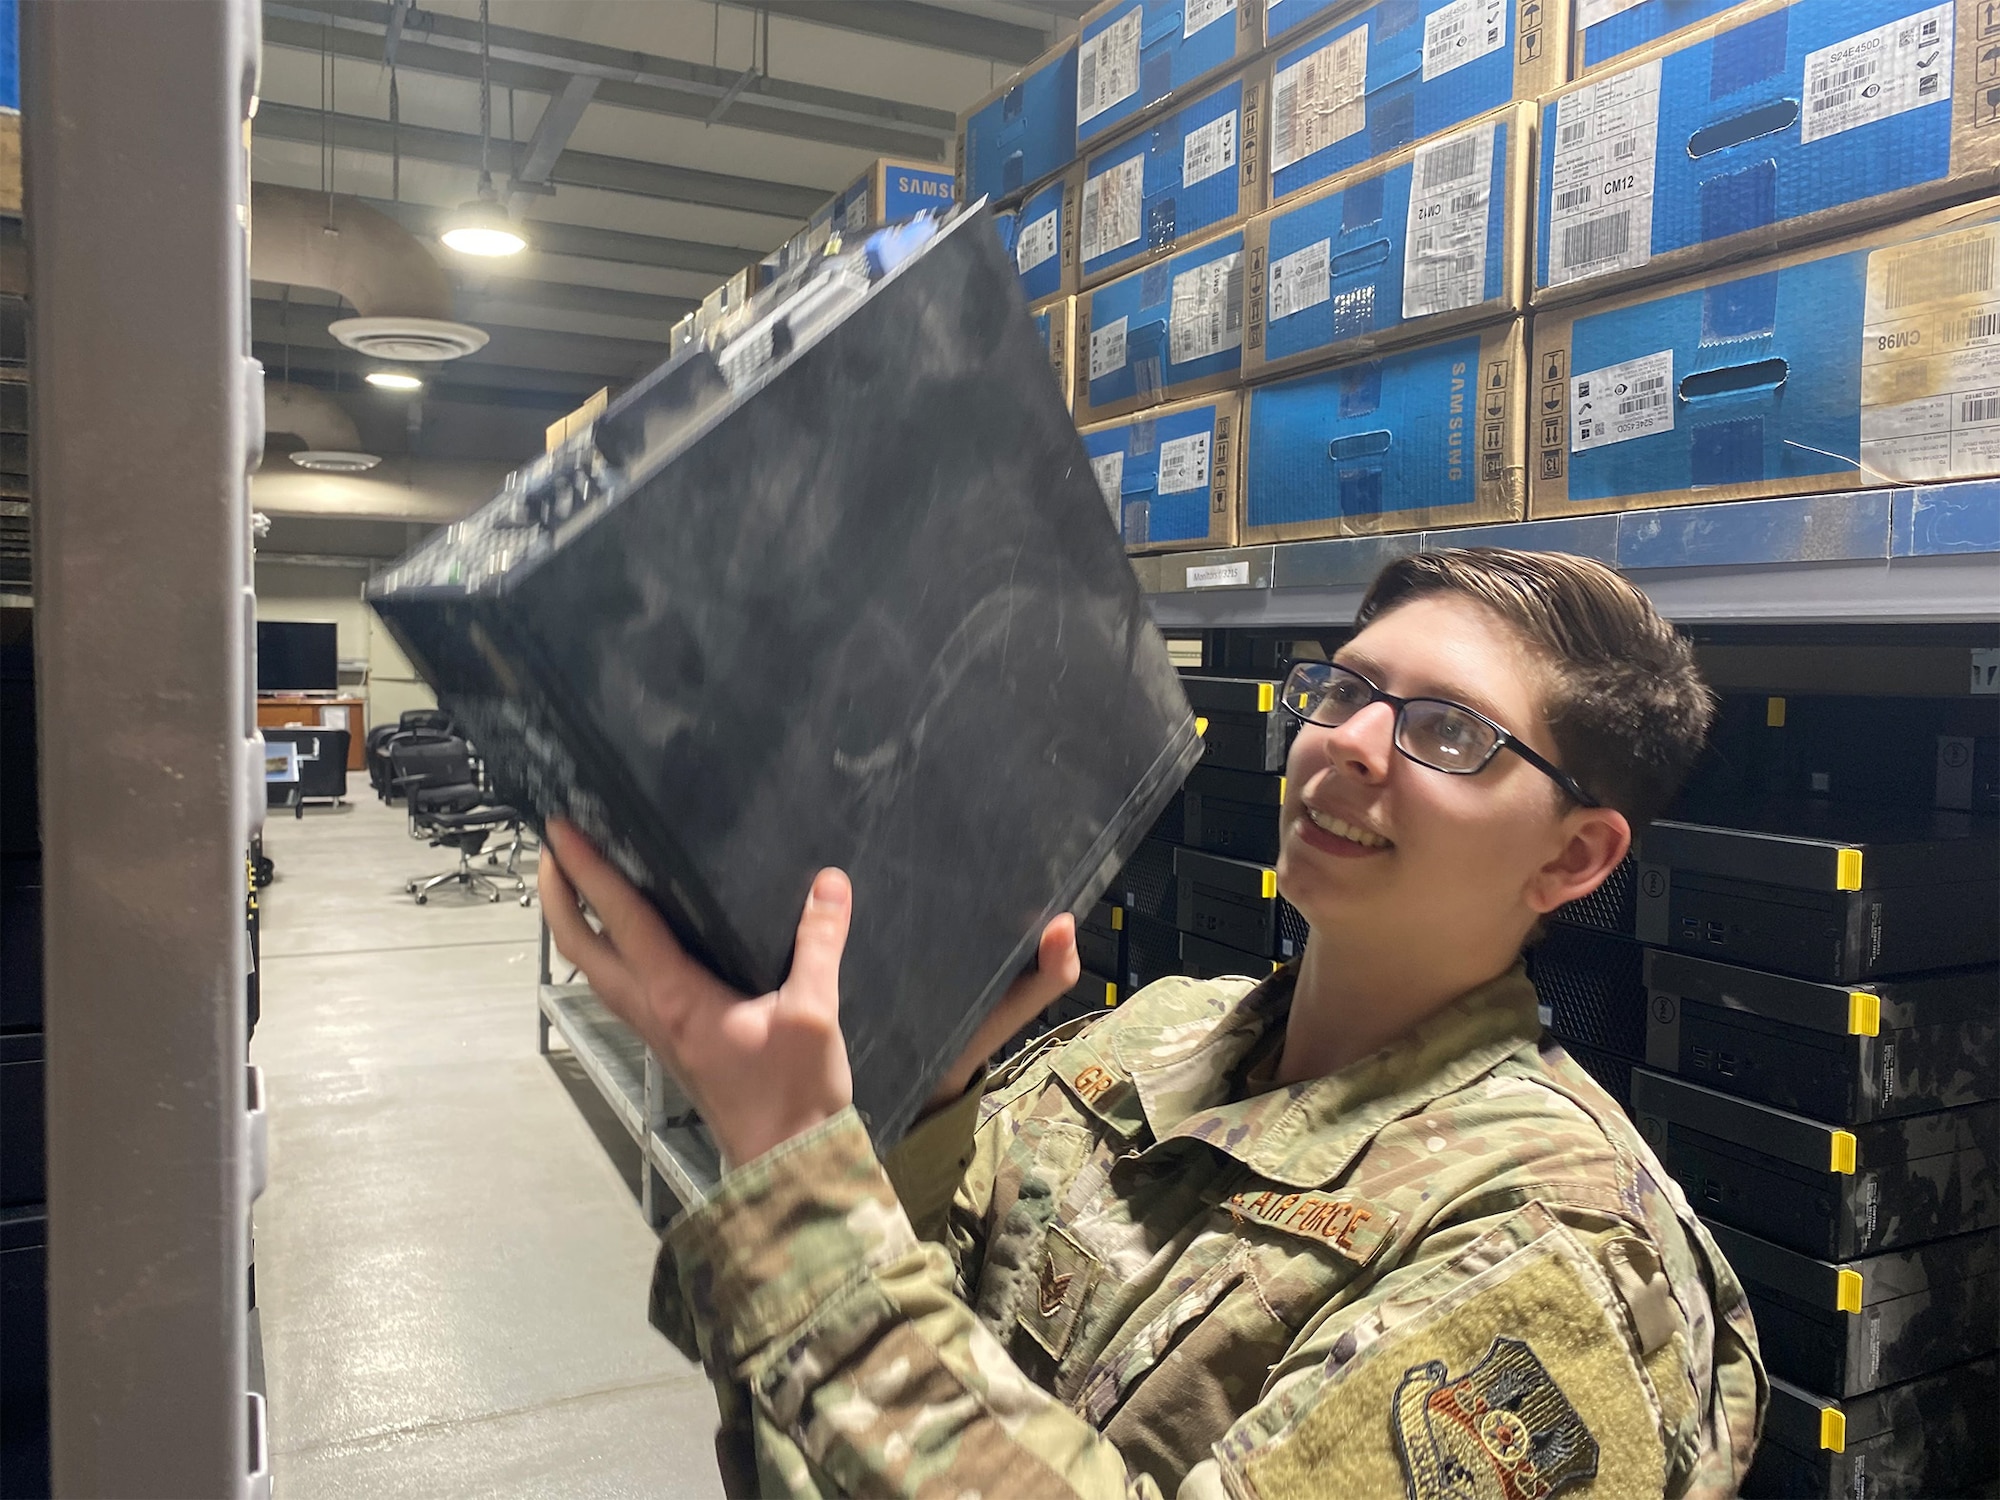 Staff Sgt. Valerie Graw leads a technology refresh project of 55 desktop computers from a deployed location in Southwest Asia. Graw was named the 88th Air Base Wing’s 2020 Airman of the Year for her work in the 88th Communications Squadron. CONTRIBUTED PHOTO